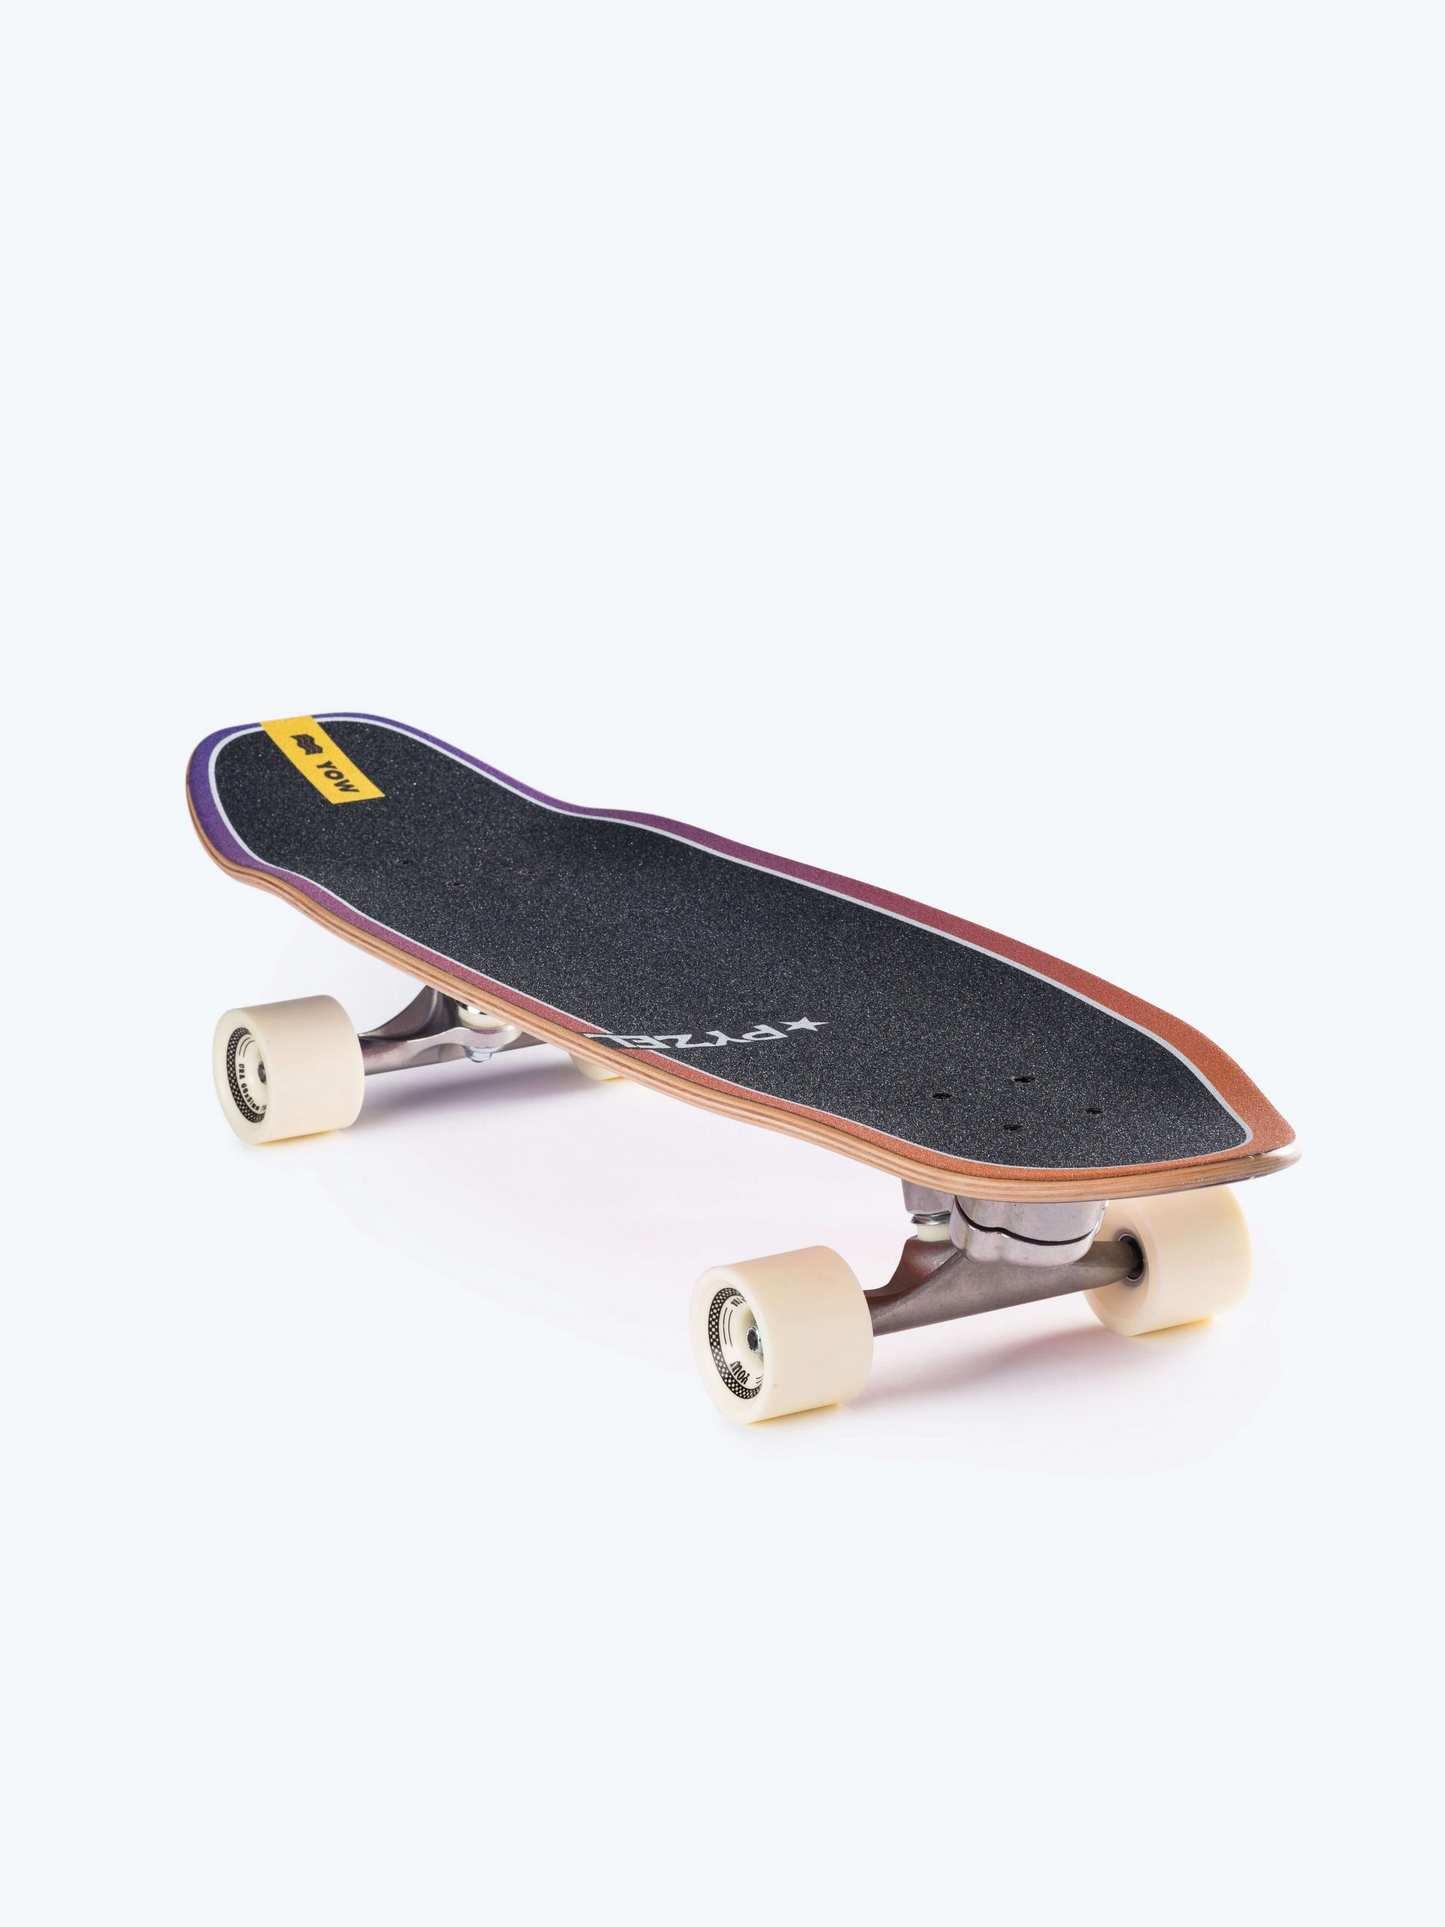 Shadow 33.5" Pyzel Surfskate